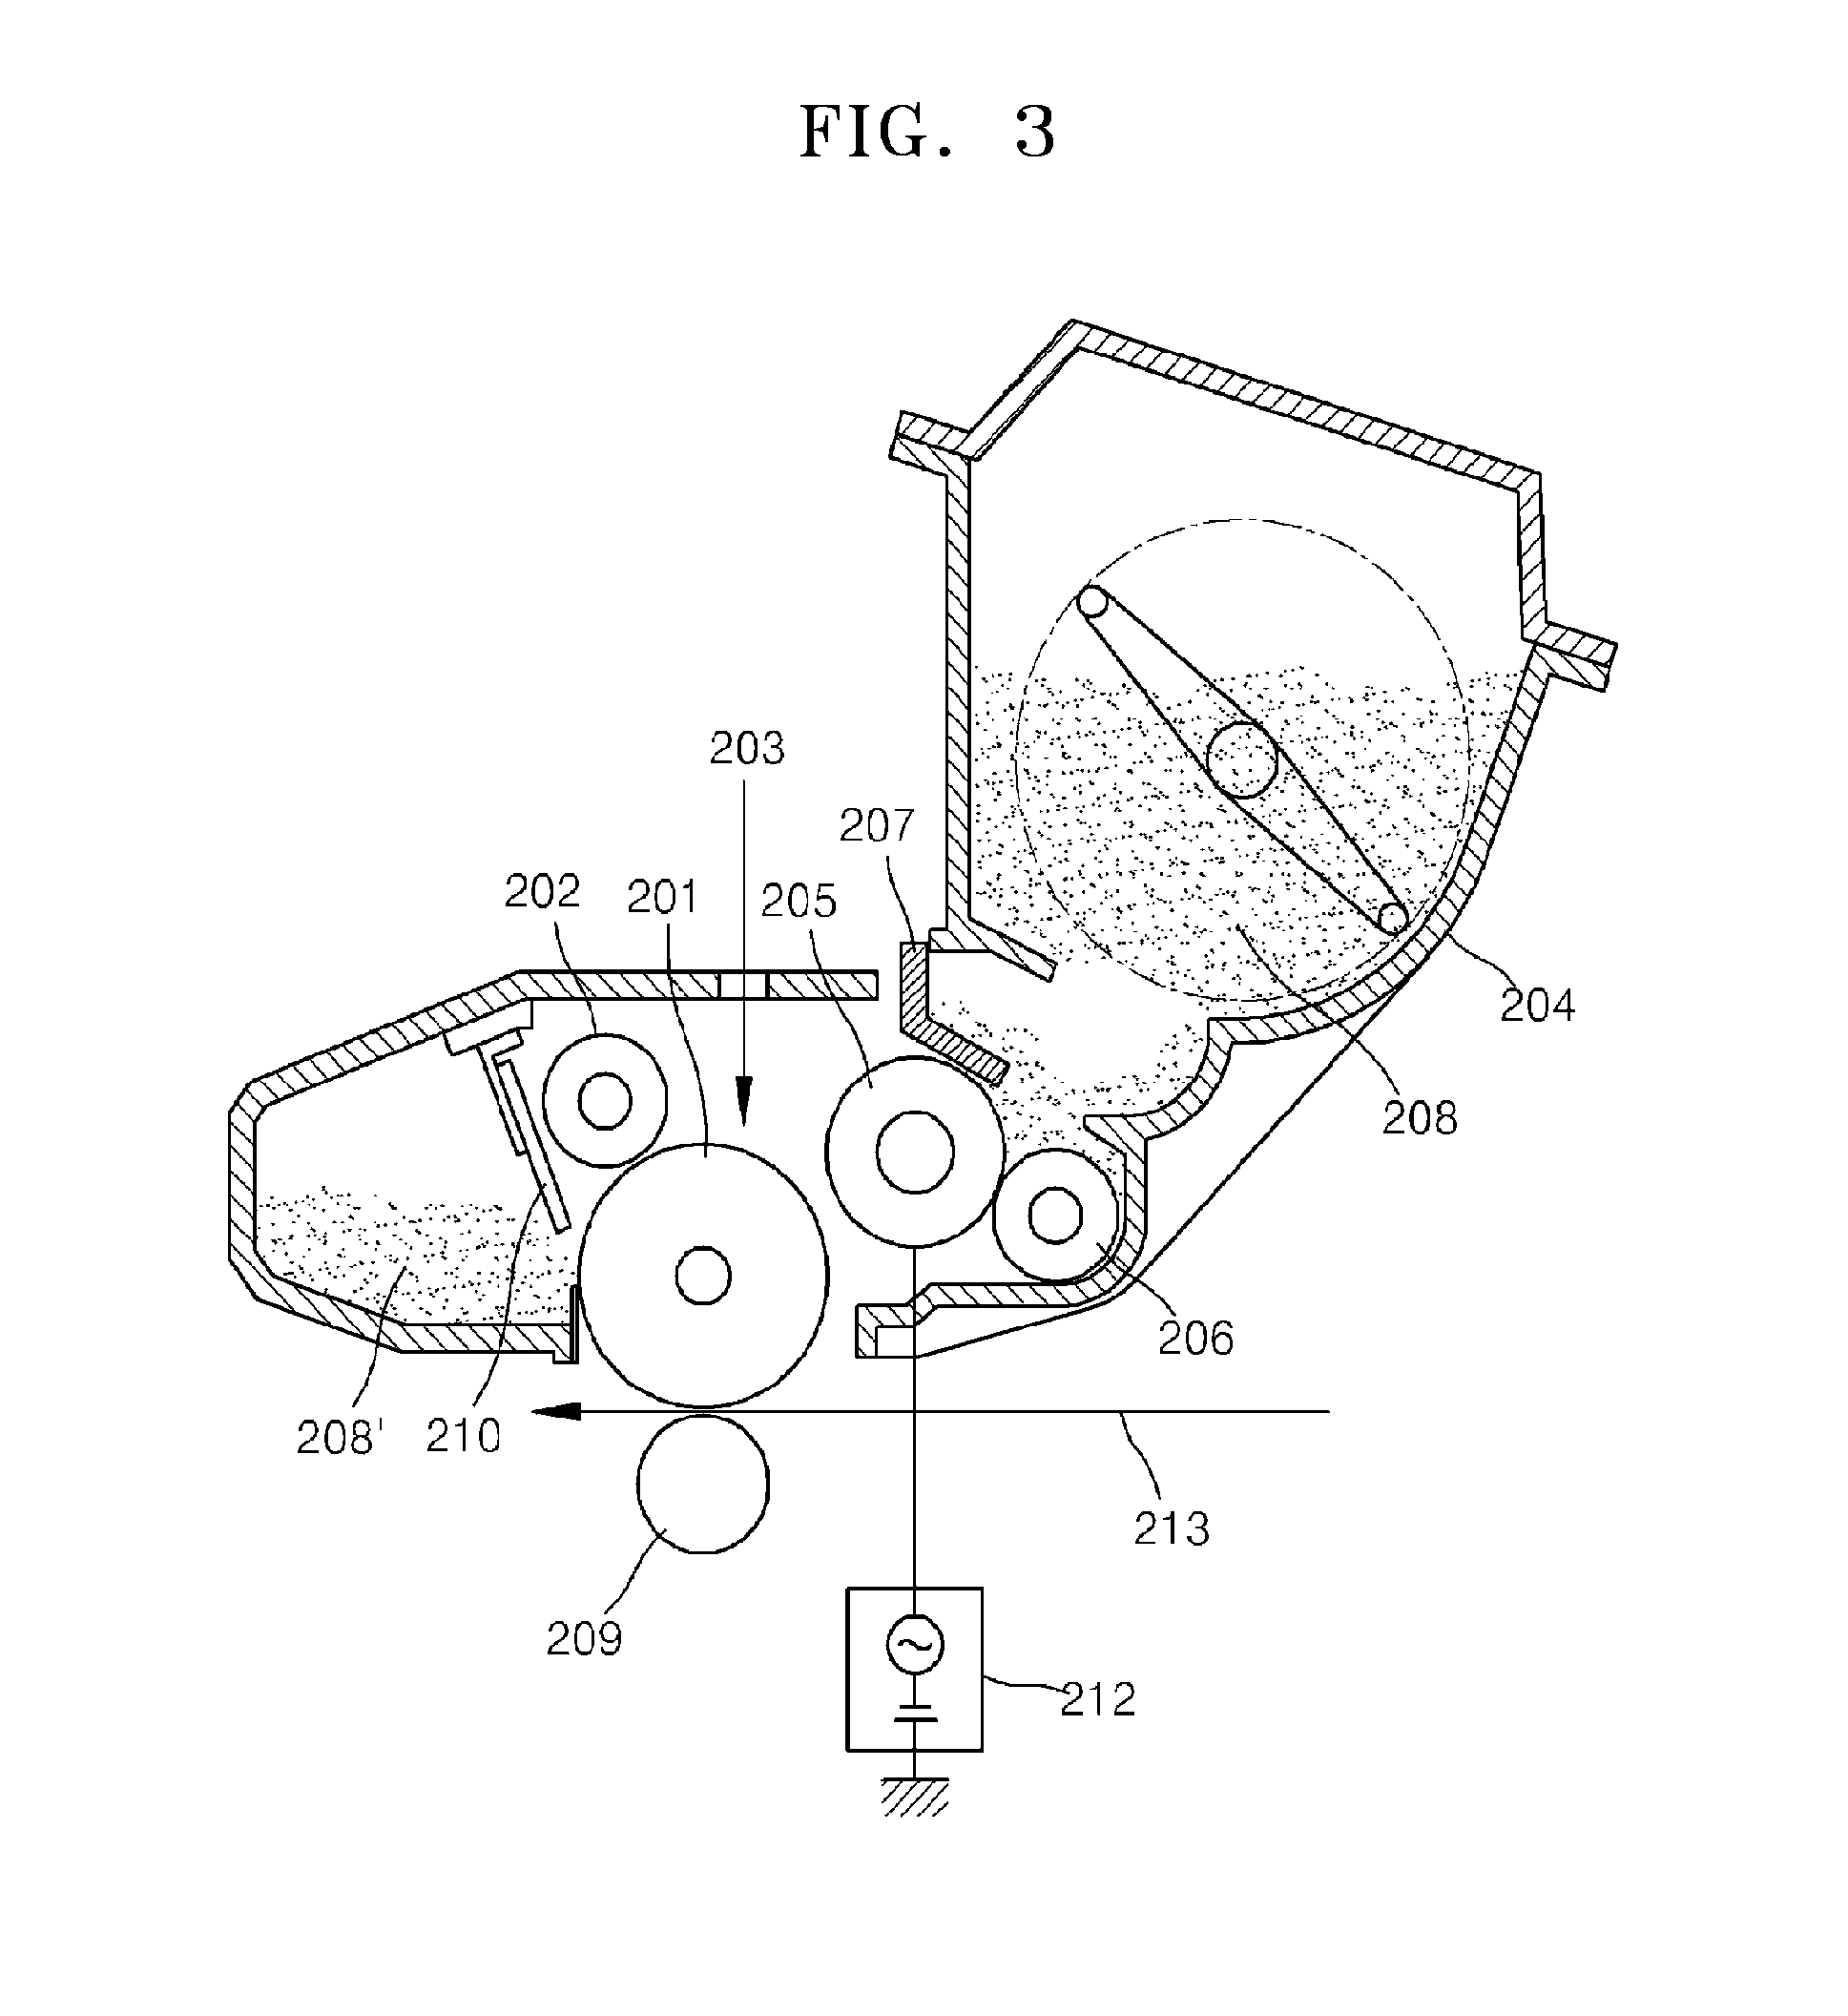 Toner for developing electrostatic charge image, method of preparing the same, device for supplying the same, and apparatus and method for forming image using the same